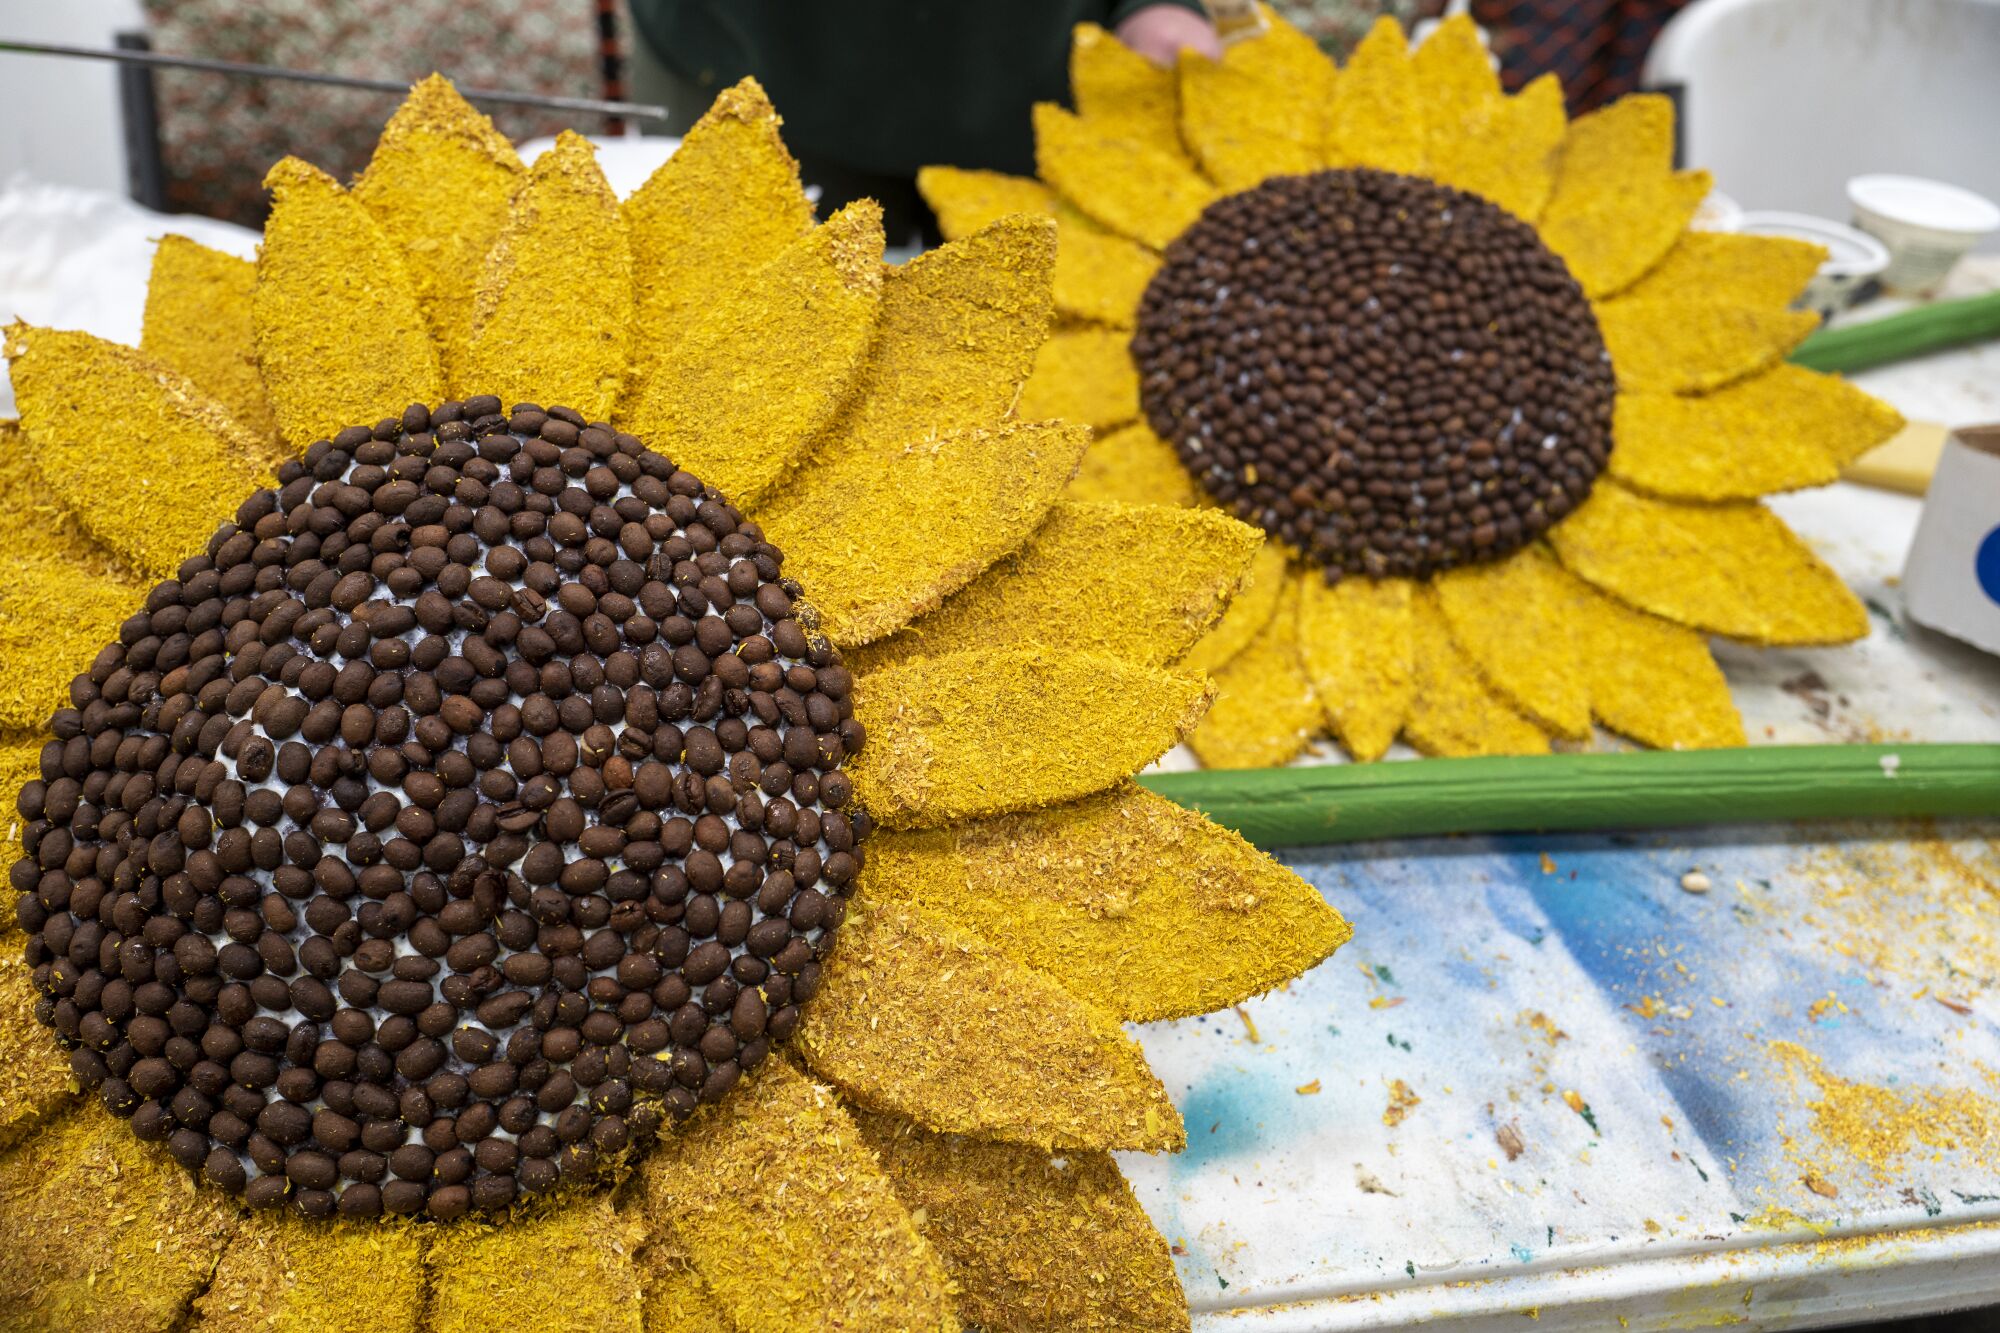 Detail of sunflowers being prepared for the Rose Parade